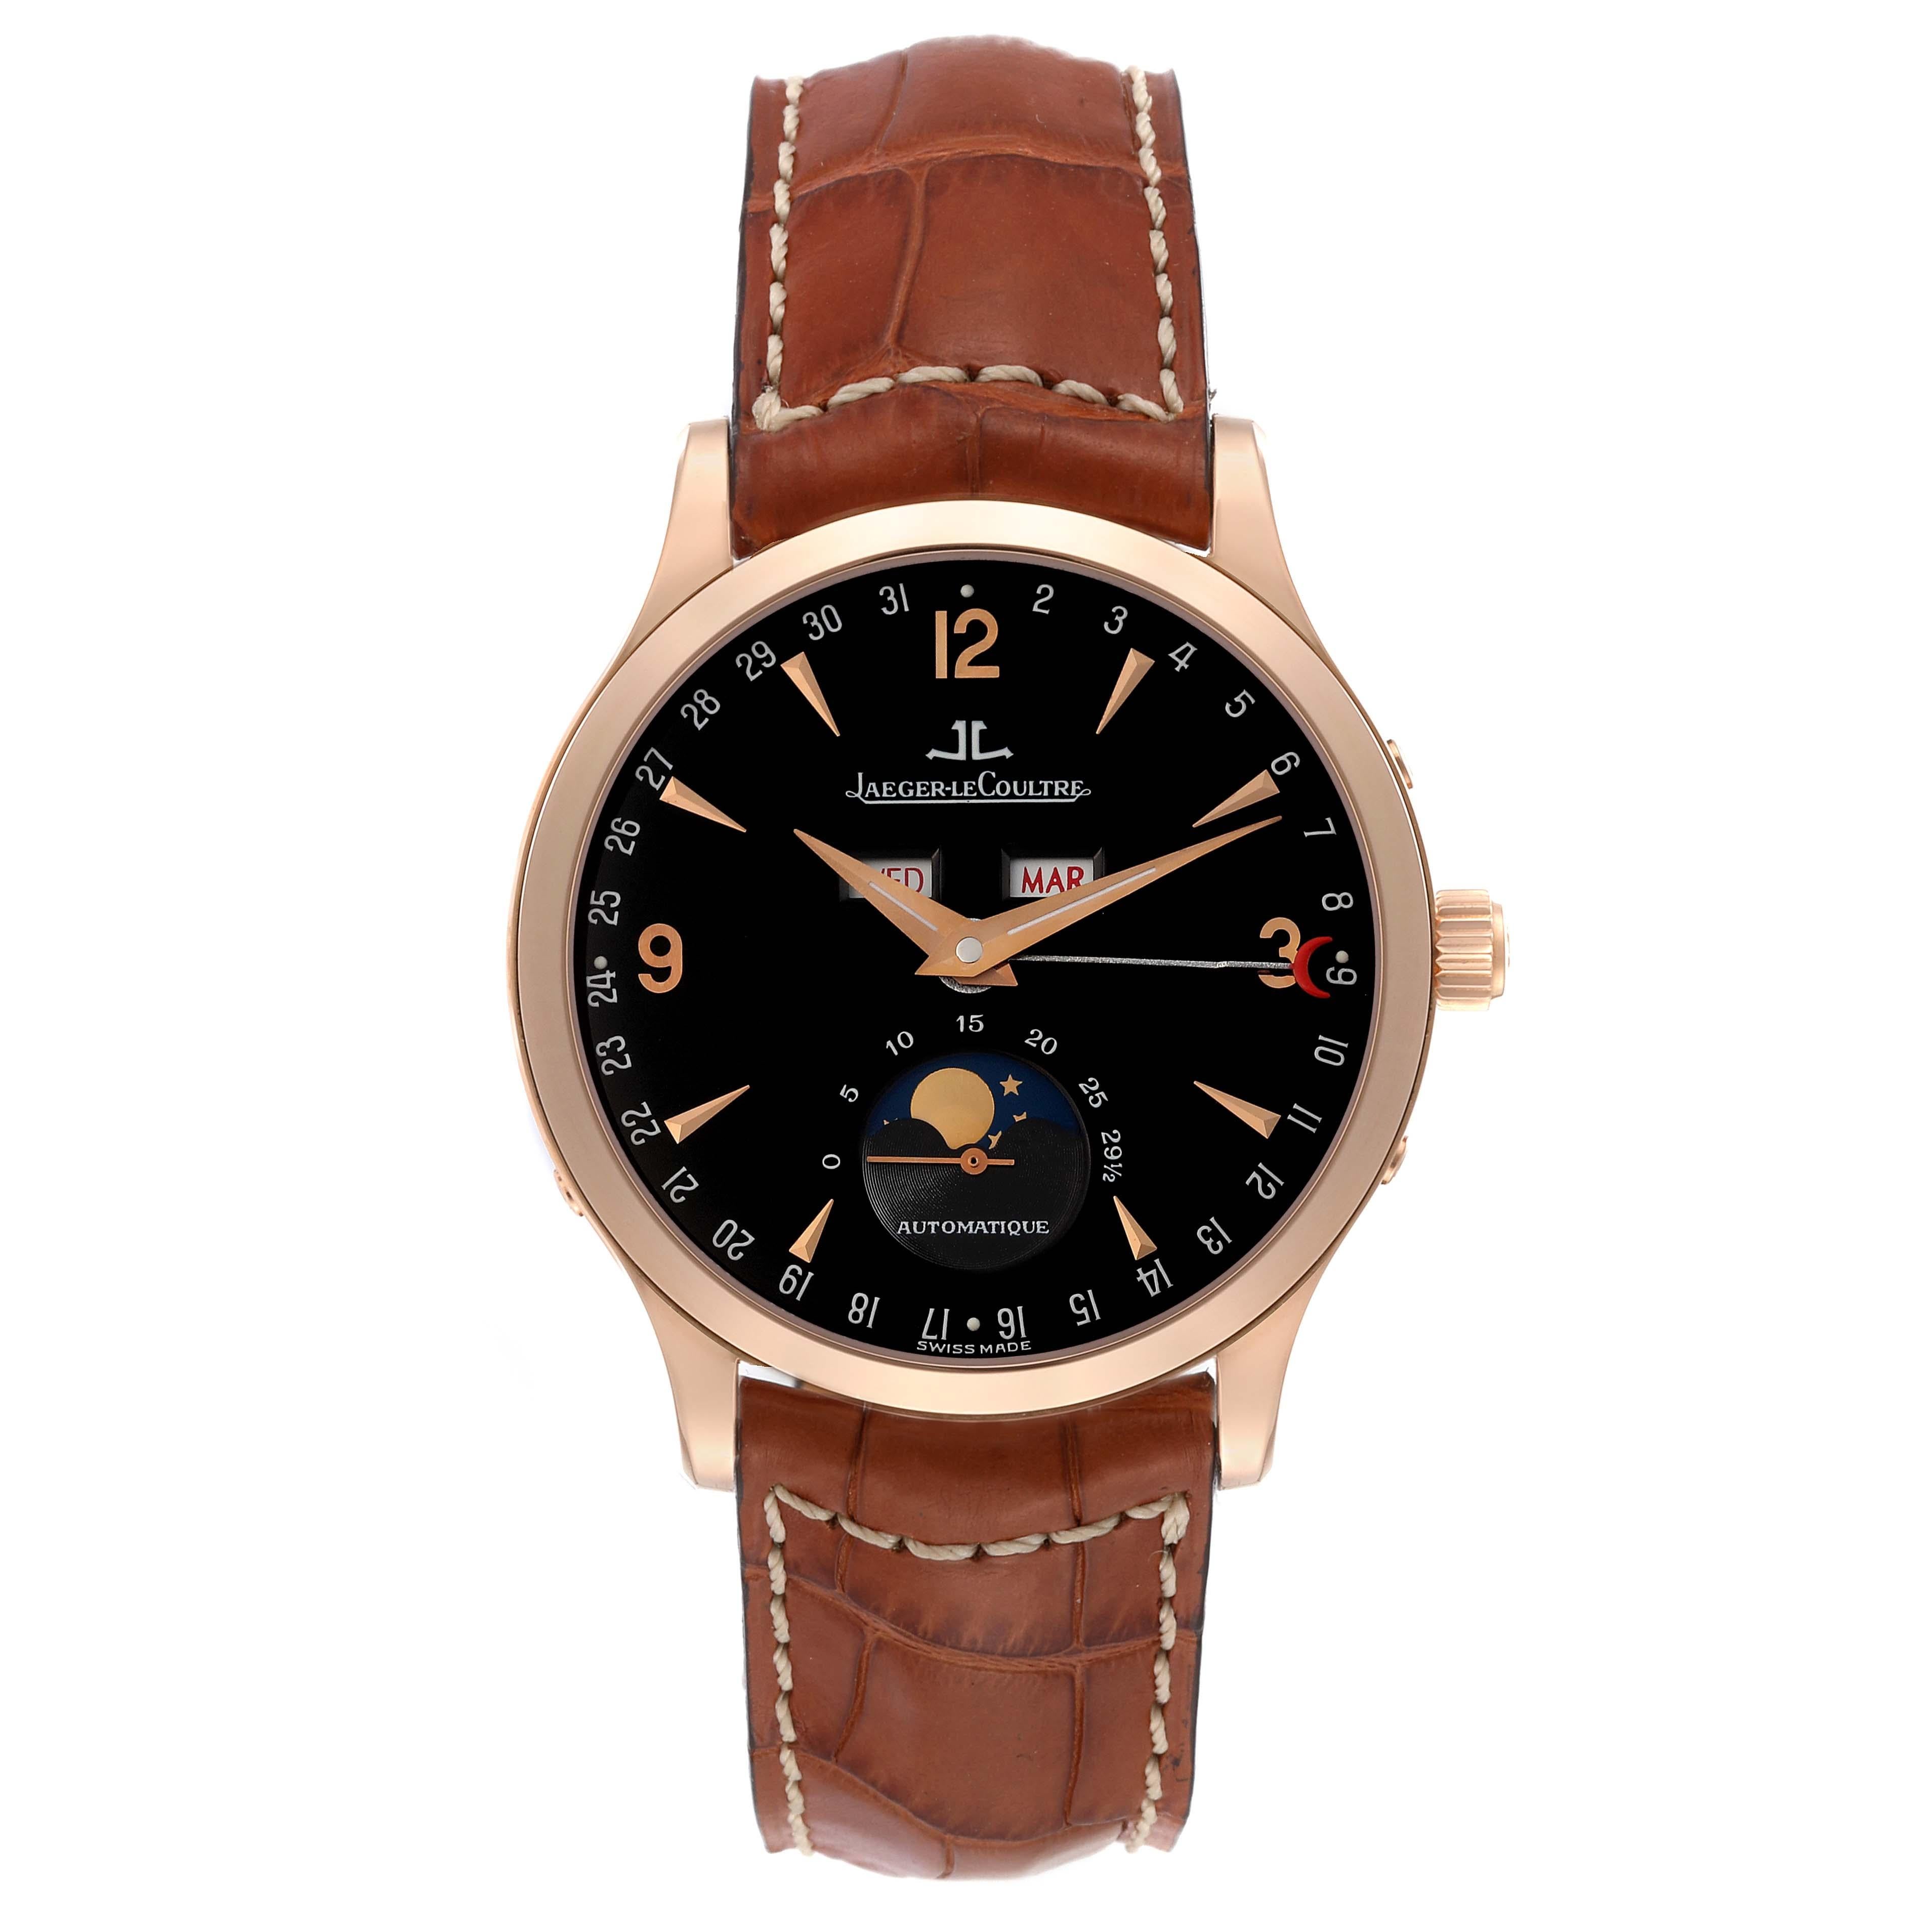 Jaeger Lecoultre Master Moonphase Rose Gold Mens Watch 140.2.98.S Box Papers. Self-winding automatic movement. 18K rose gold case 37.0 mm in diameter. Case thickness: 10.1 mm. Concave lugs. Transparent exhibition sapphire crystal caseback. 18k rose